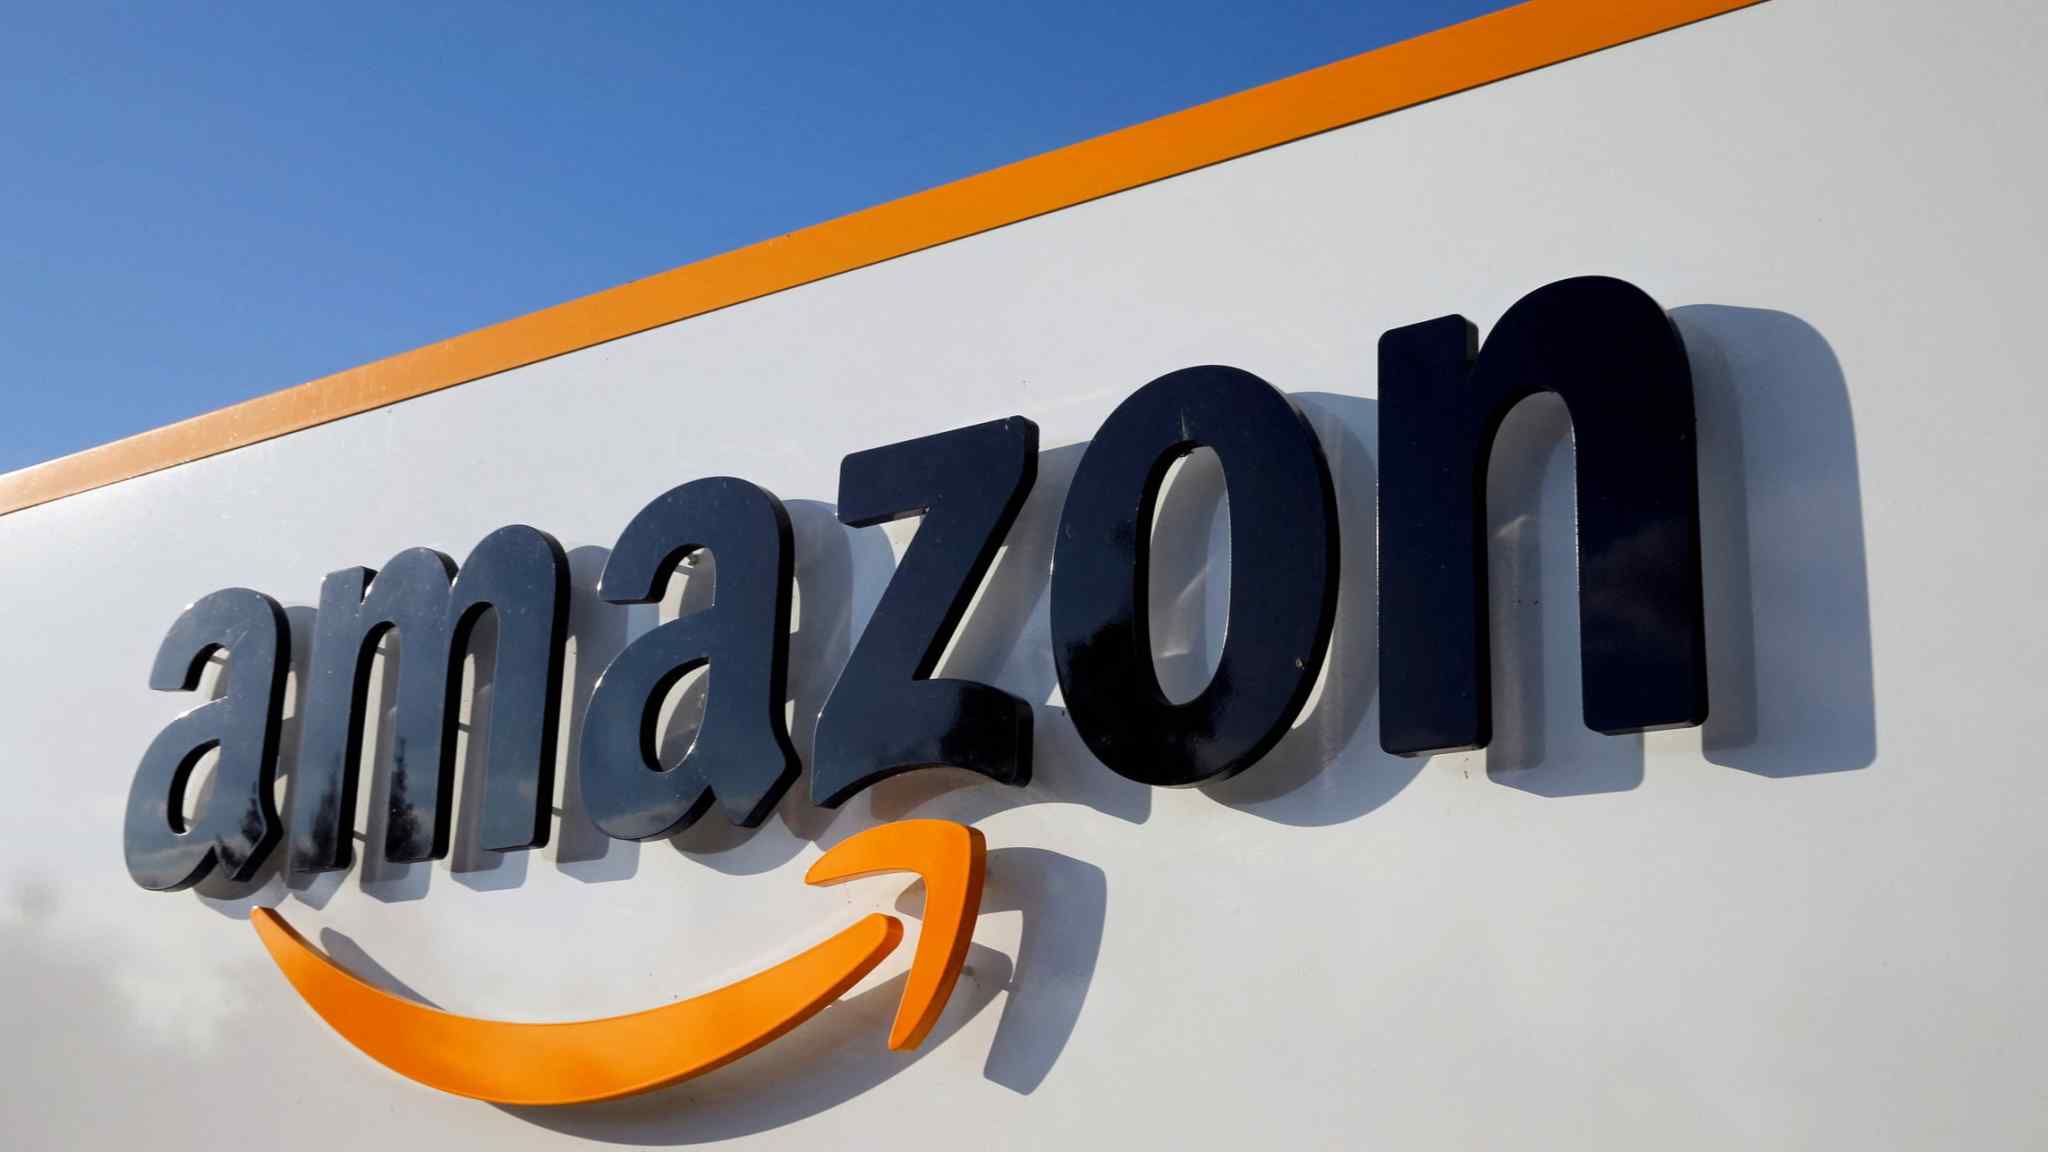 Amazon posts solid sales but softer cloud growth